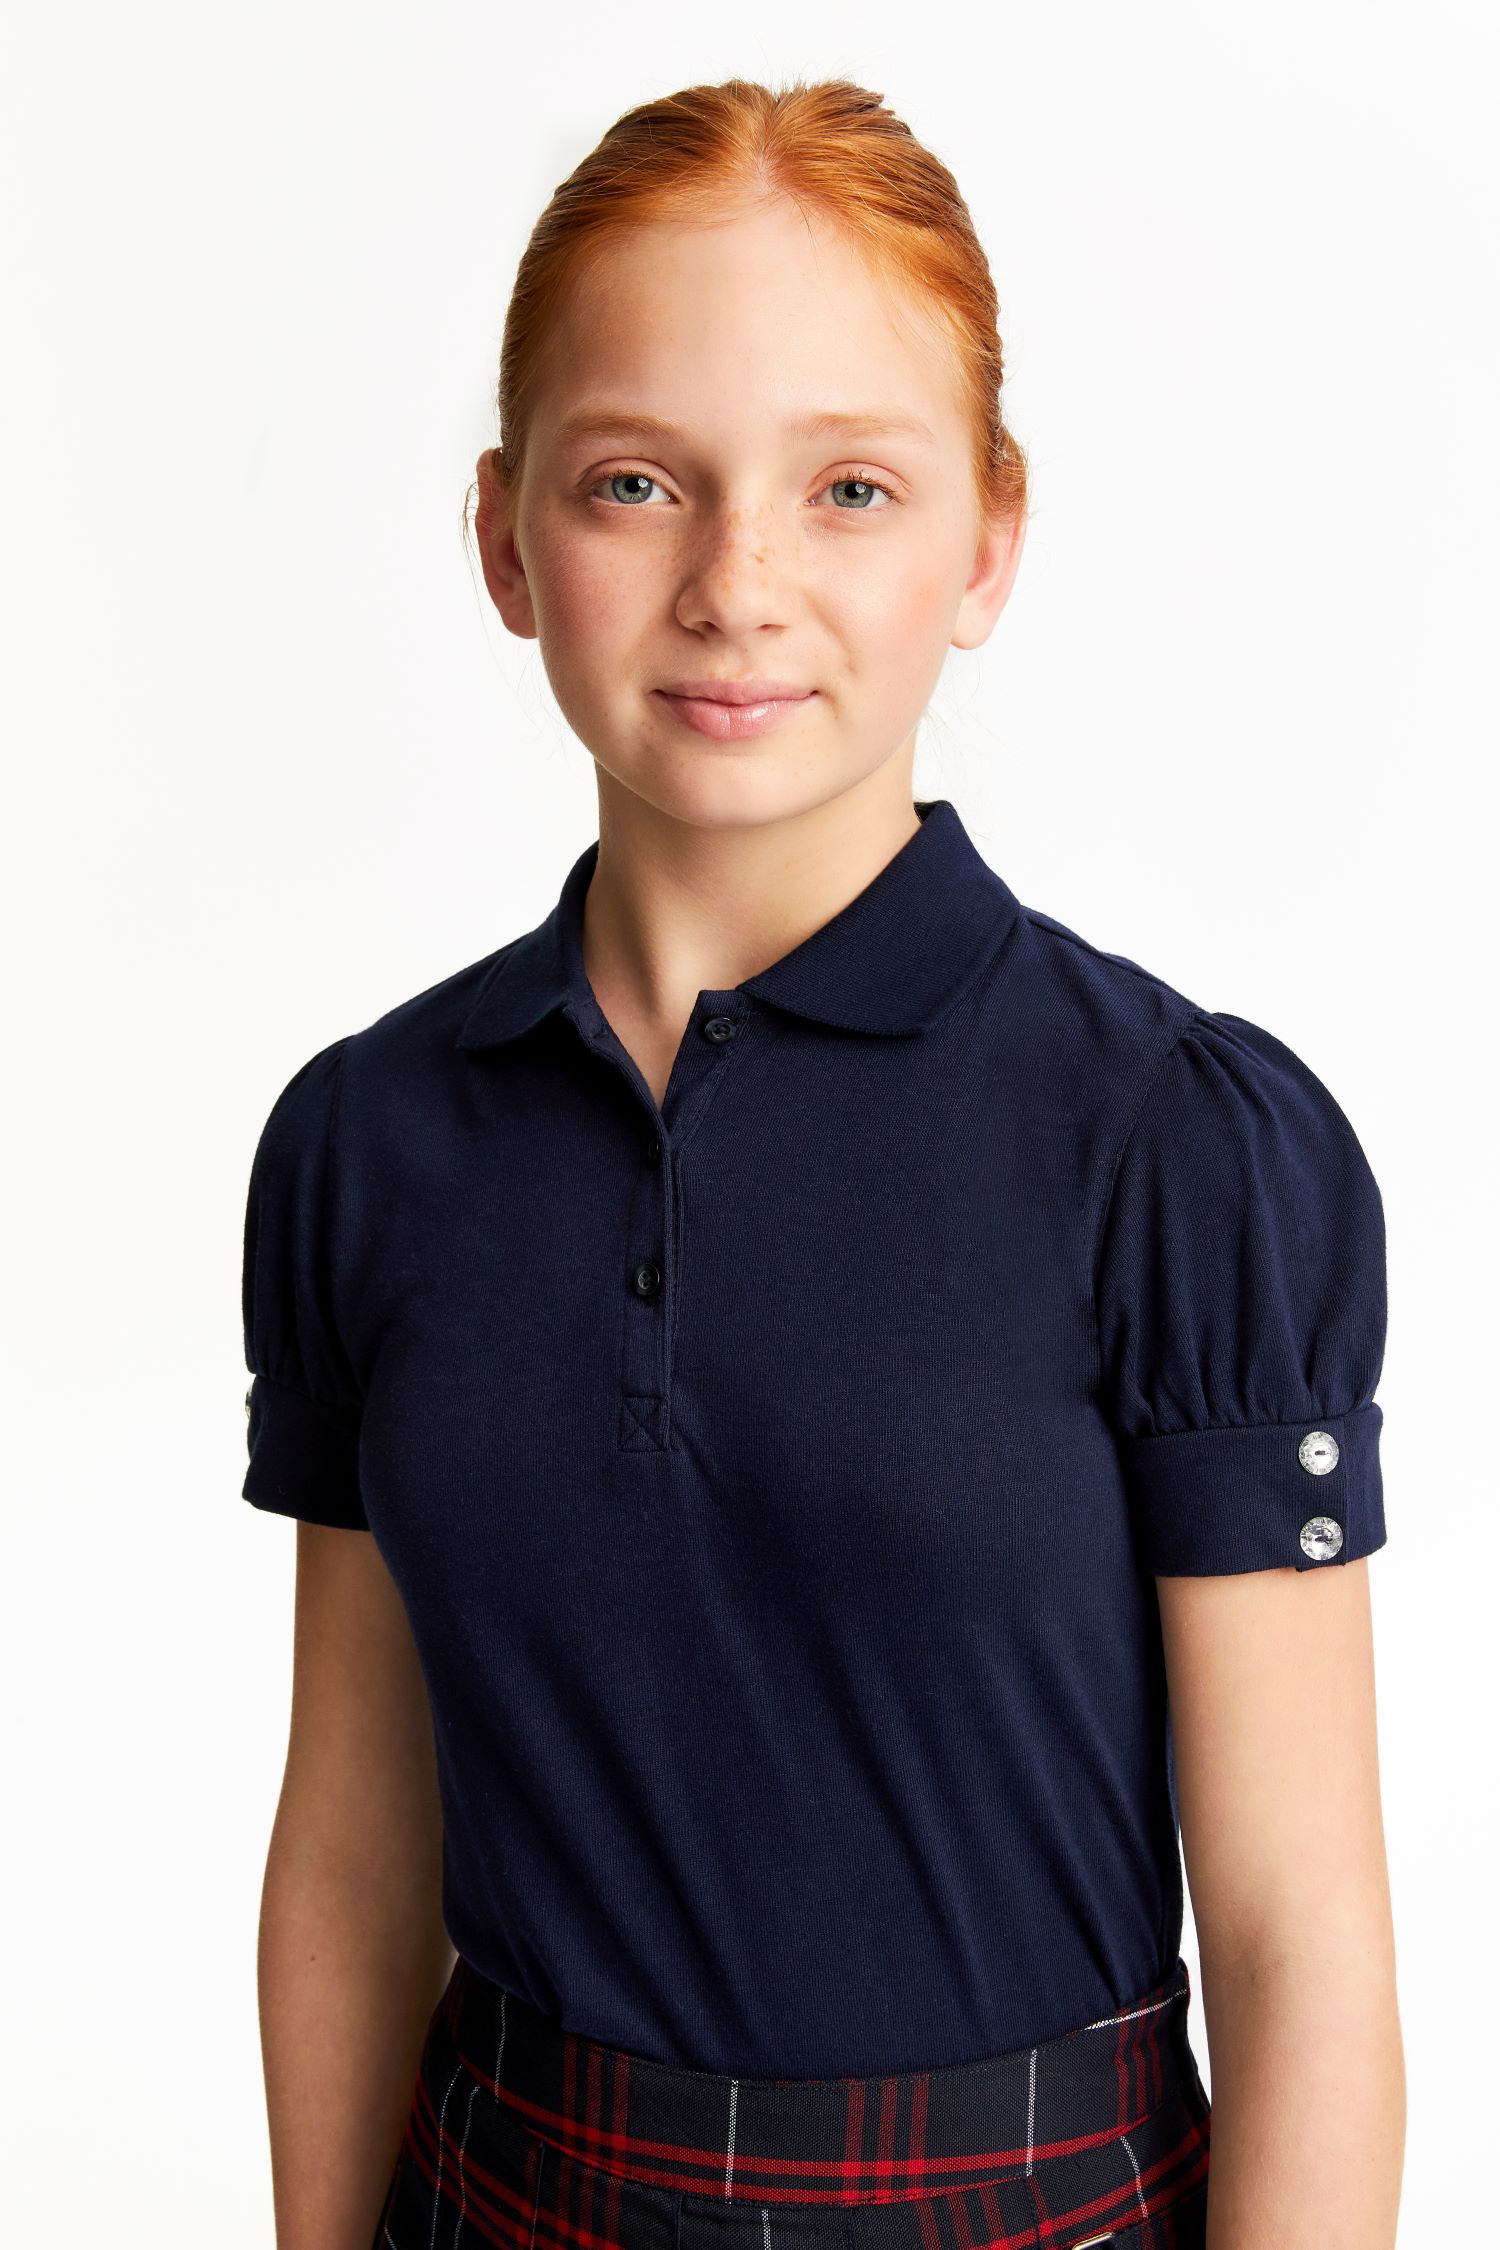 AK32GR – Toddler Girls Short Sleeve Polo with Rhinestone Button and ...